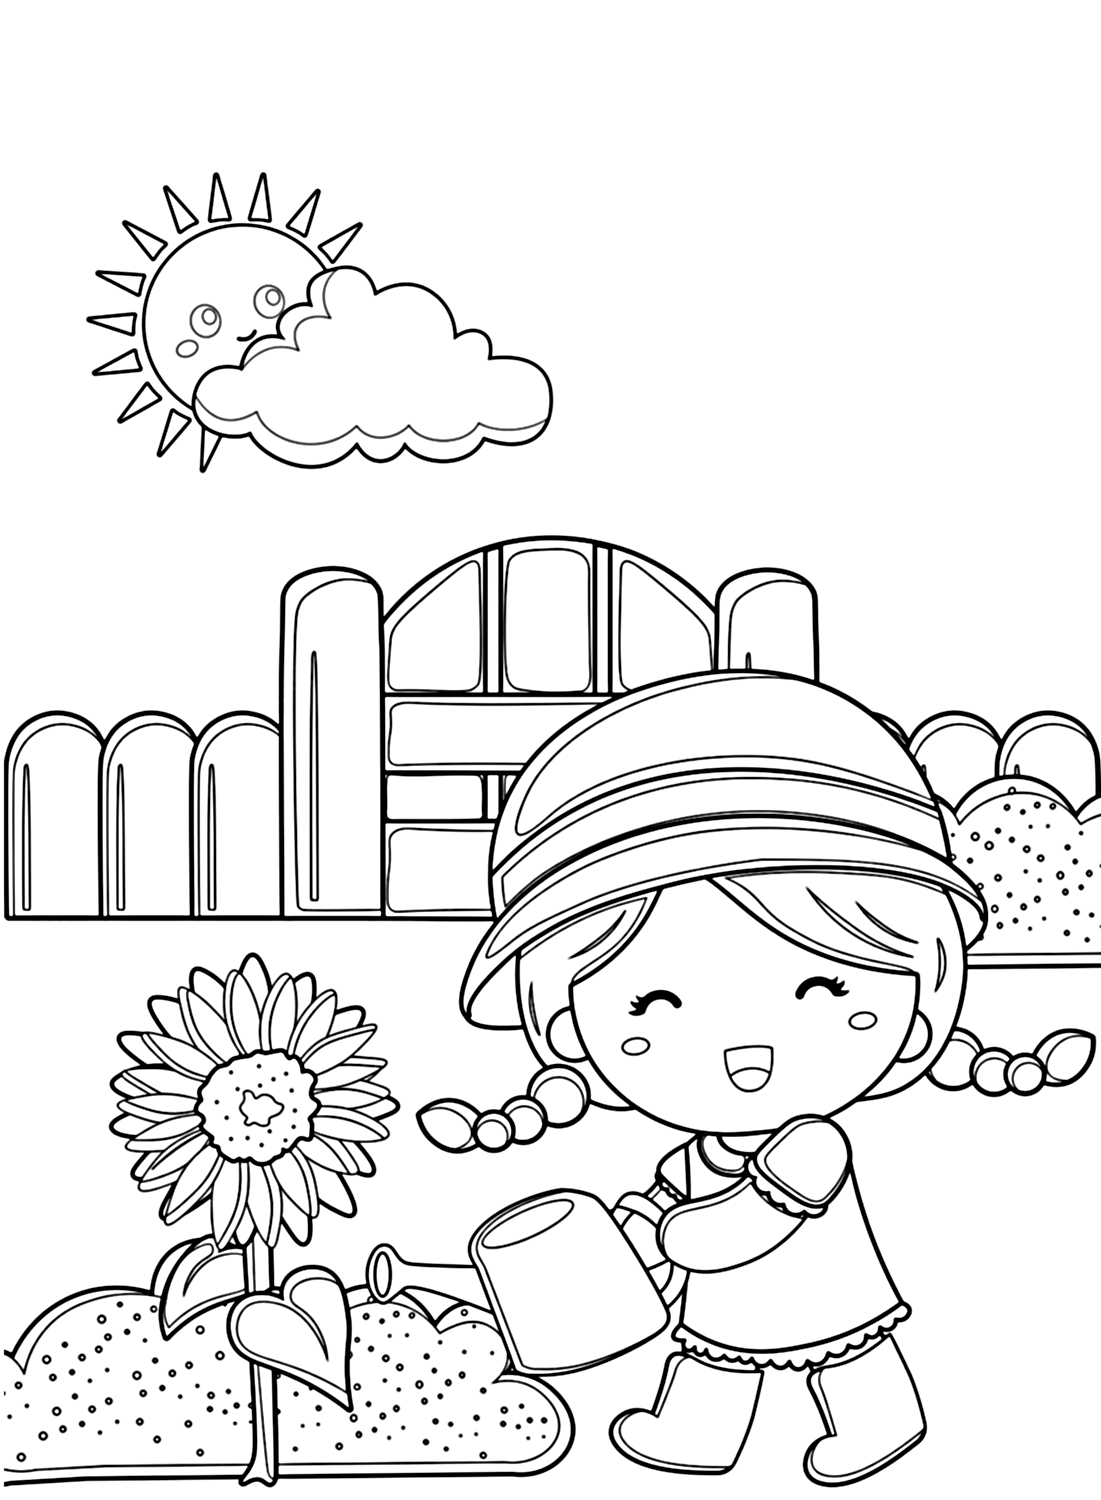 A girl and flower coloring page from Gardens